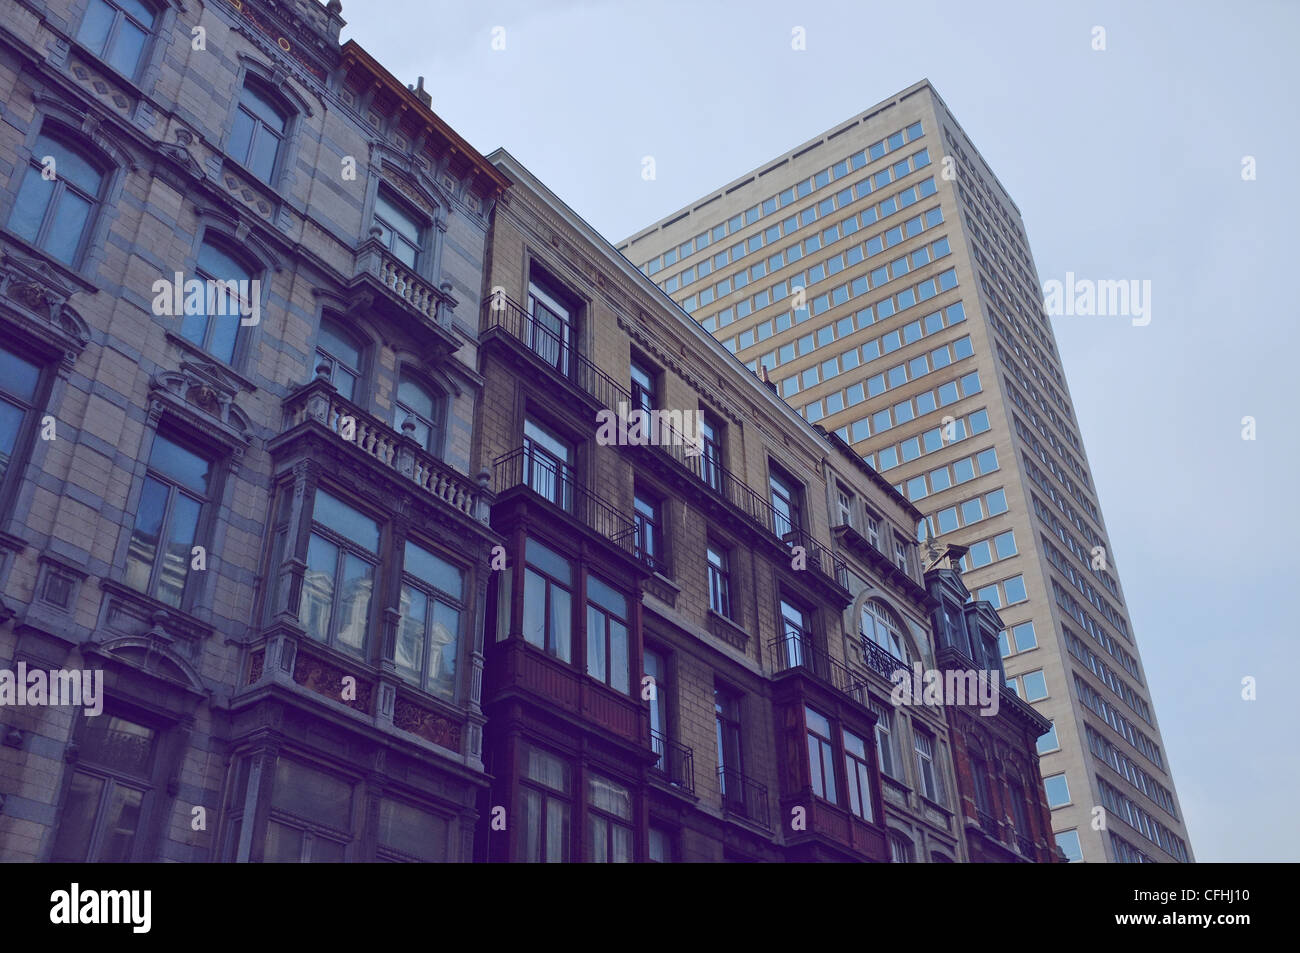 Buildings in Brussels, contrasting architectural styles in the city centre, Belgium. Stock Photo